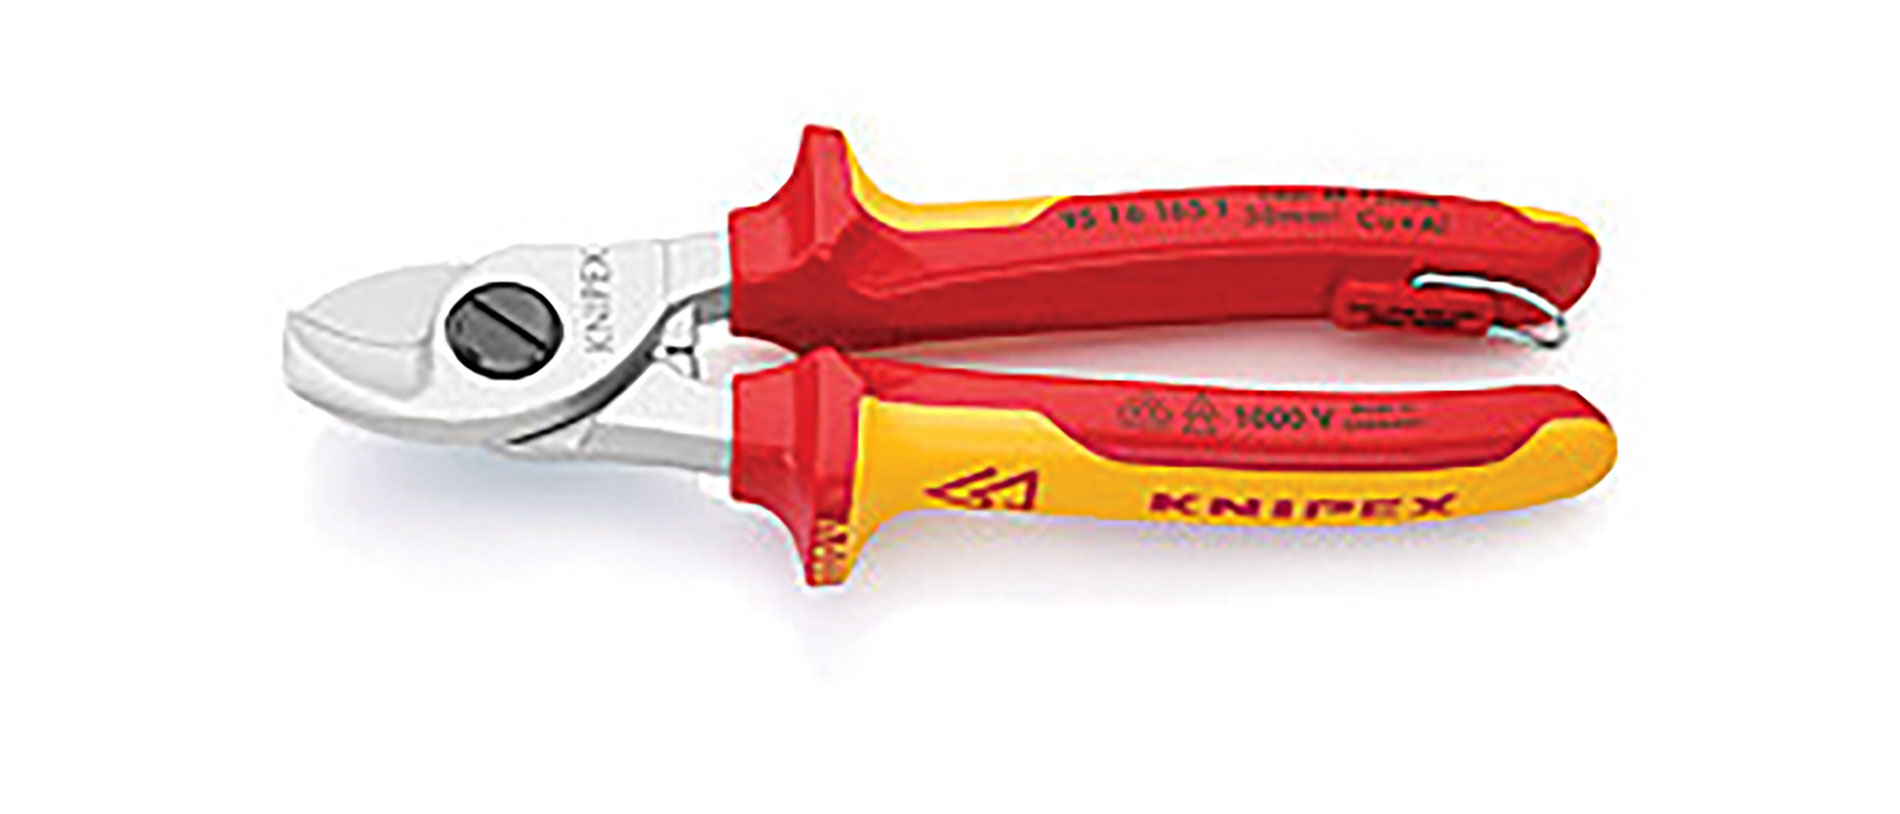 Knipex’s cable shears